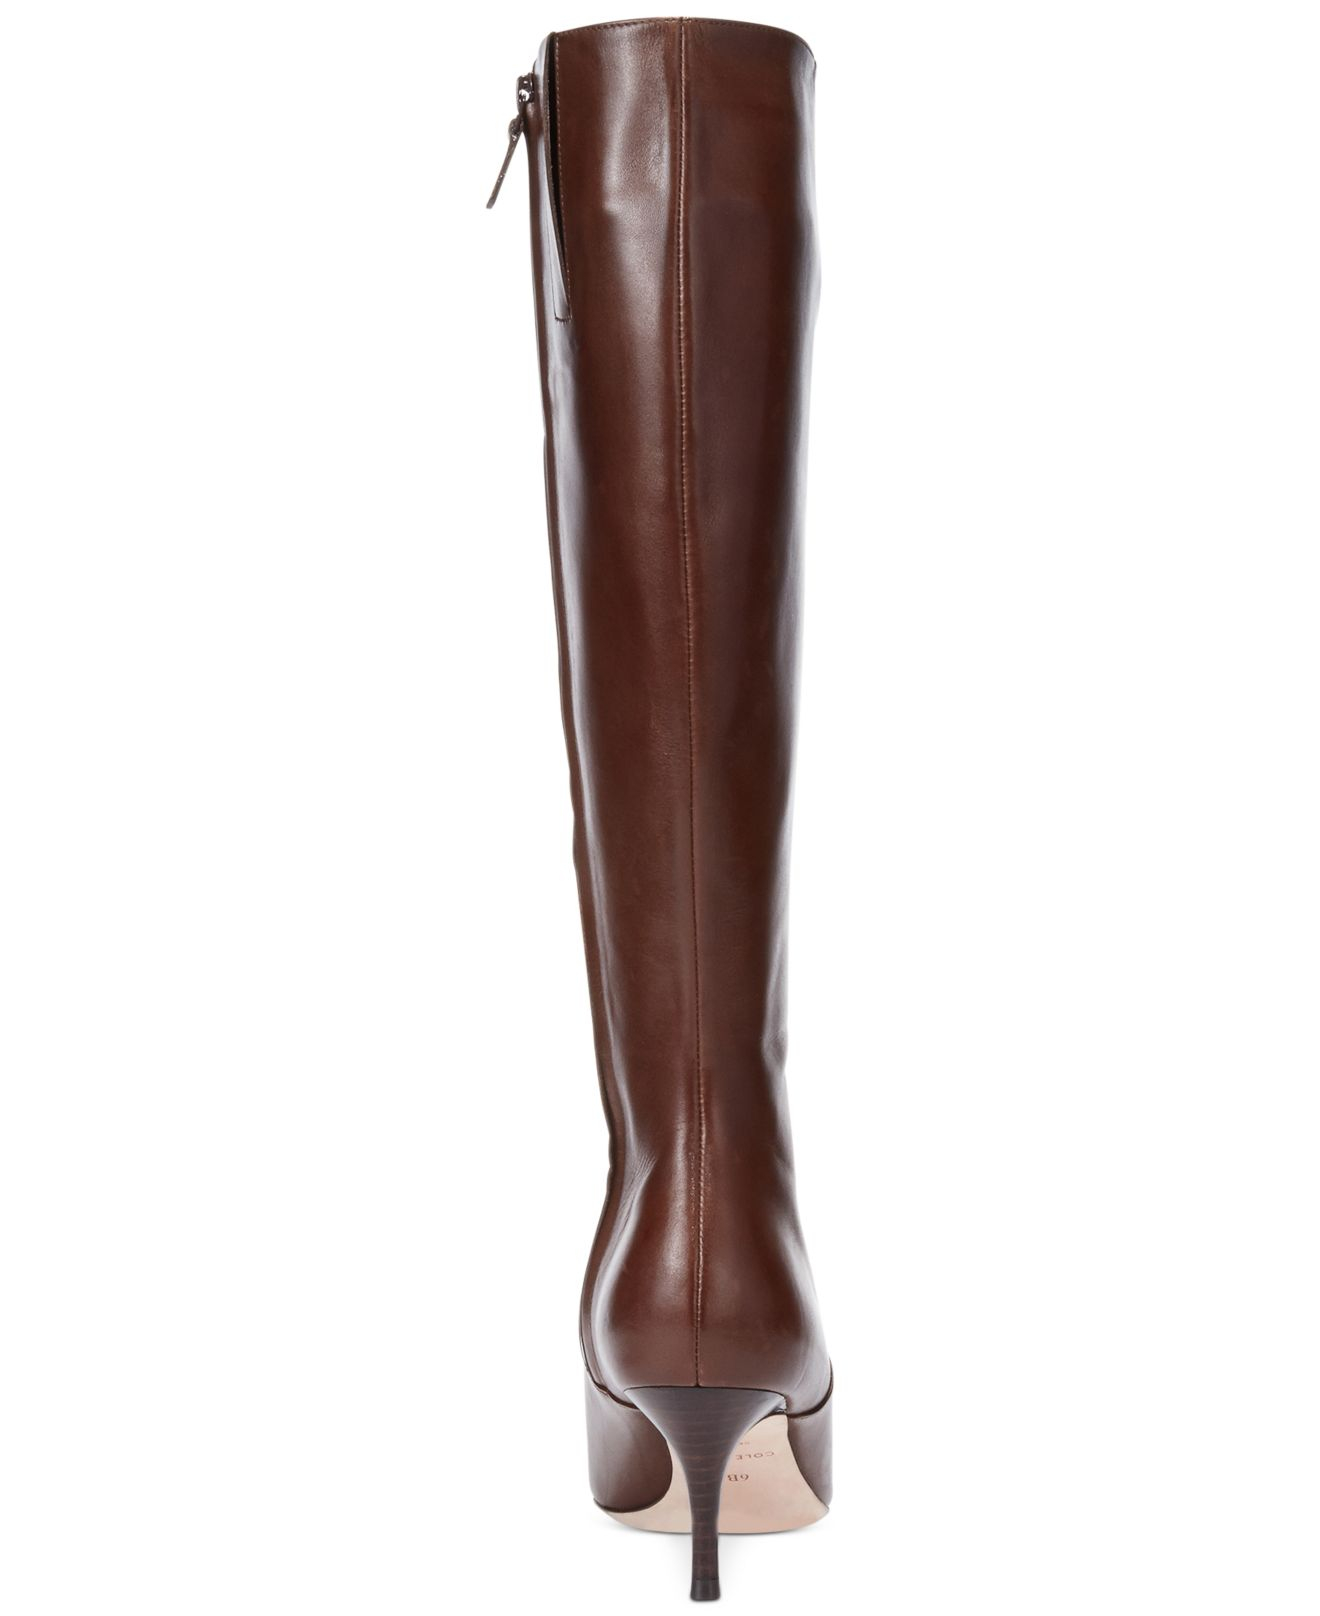 Lyst - Cole haan Women'S Carlyle Tall Dress Boots in Brown